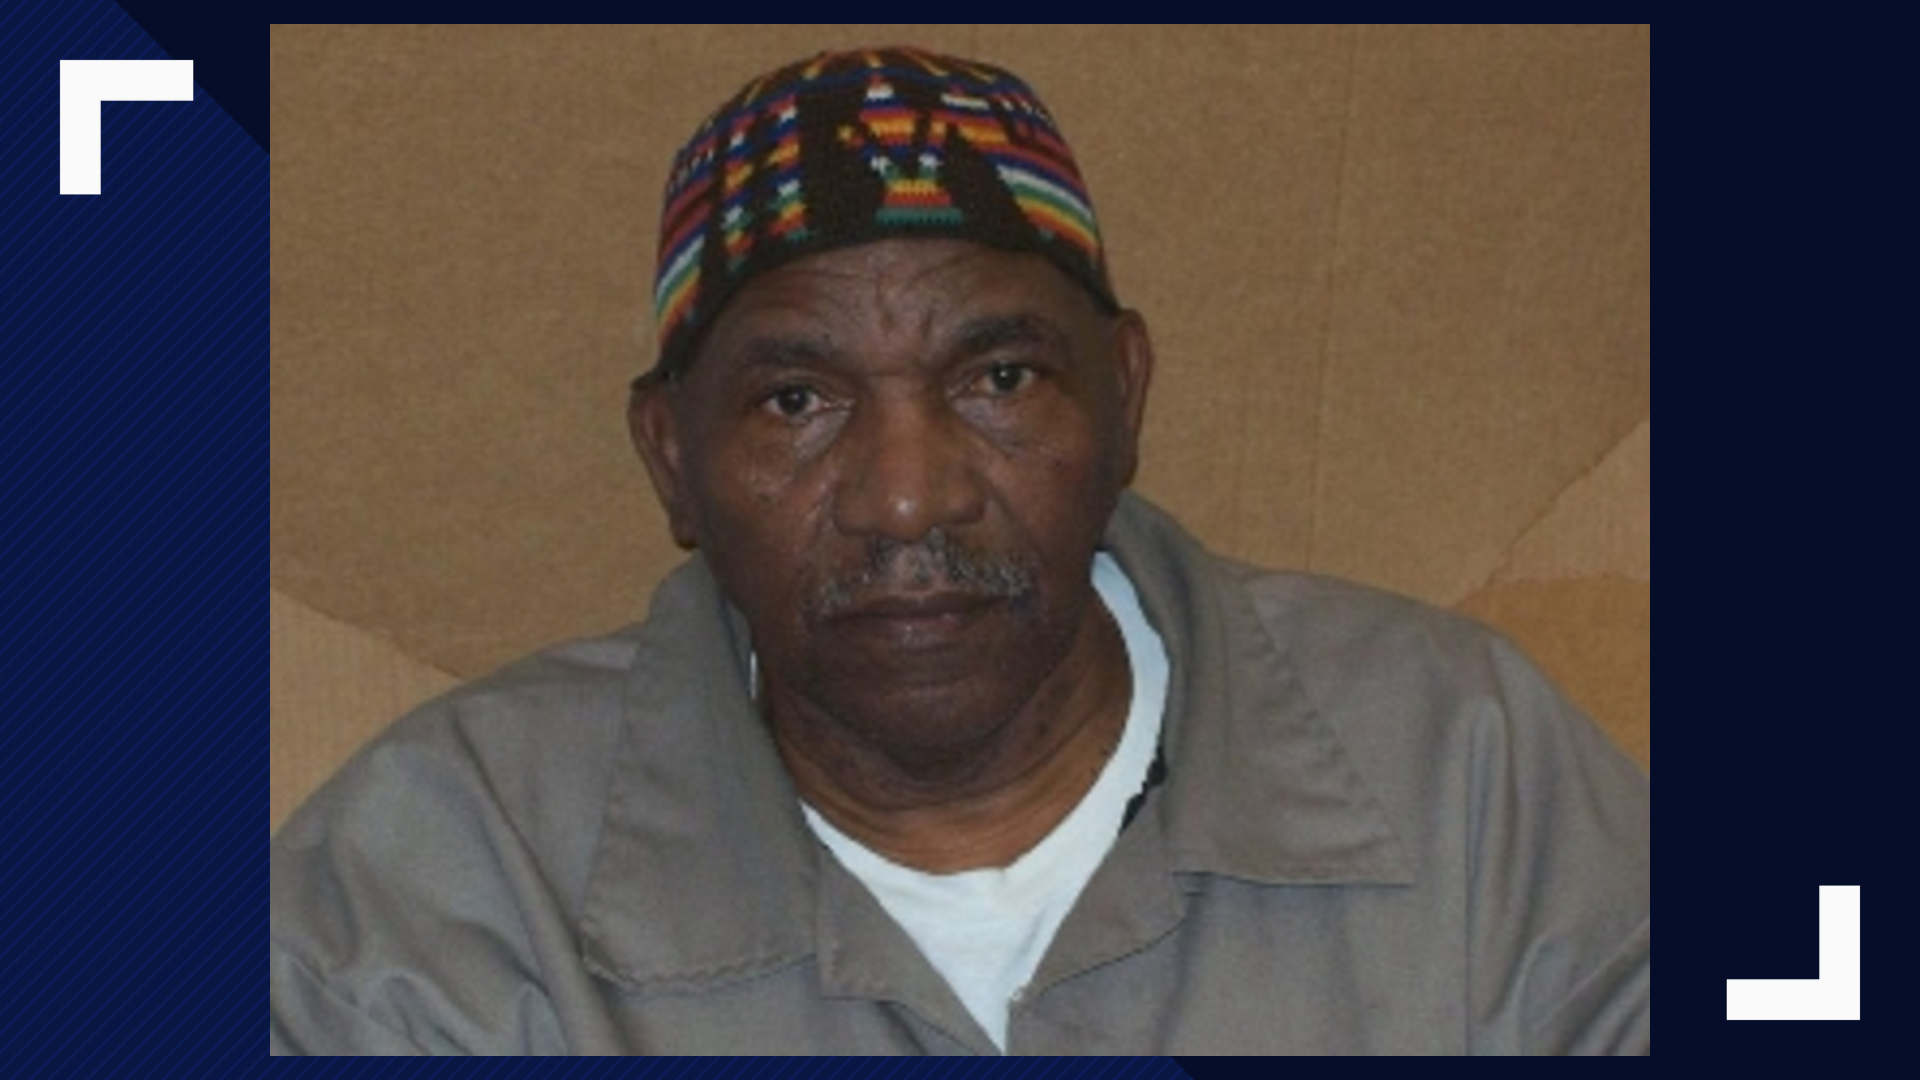 81-year-old Charles Ray Finch was released from prison Thursday, May 23, 2019. He served 43 years in a NC prison for a crime didn't commit.